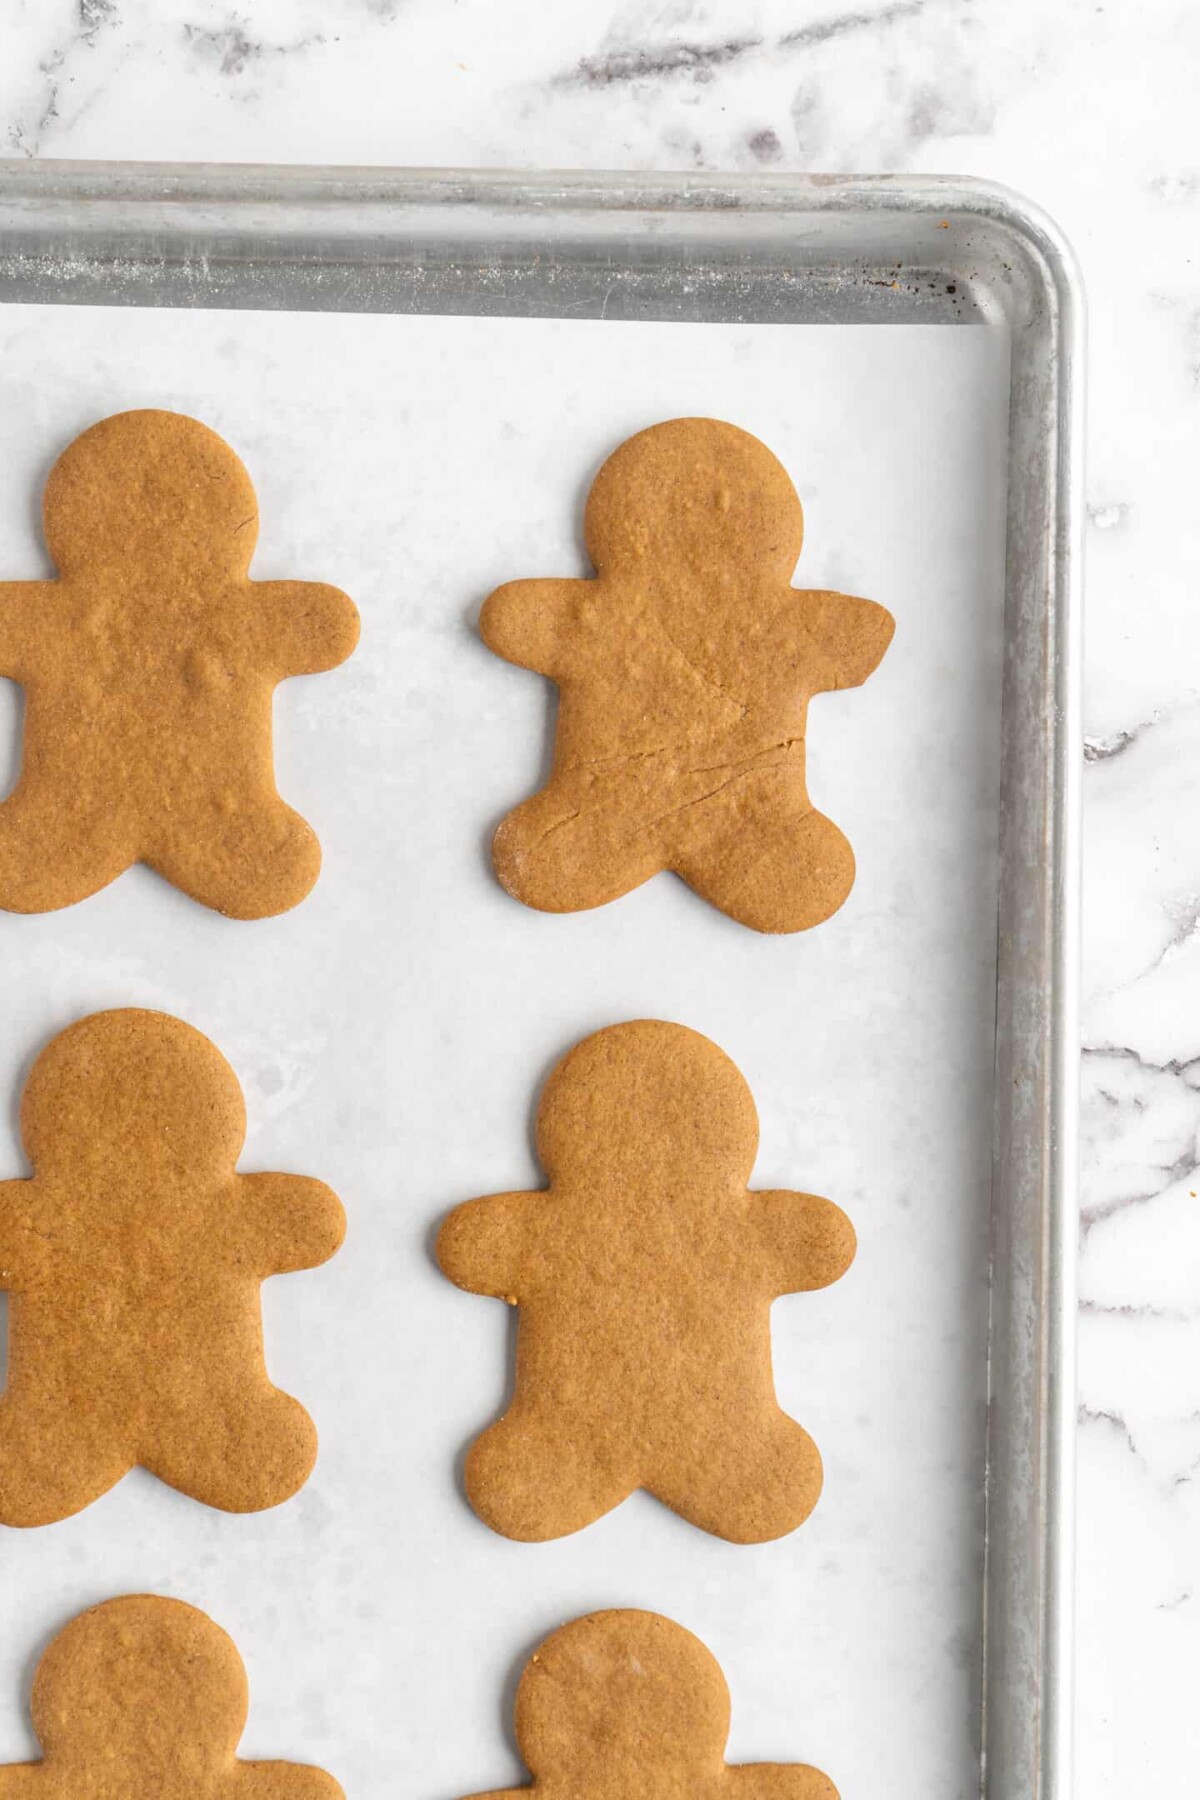 The corner of a baking sheet with cooked gingerbread men on it